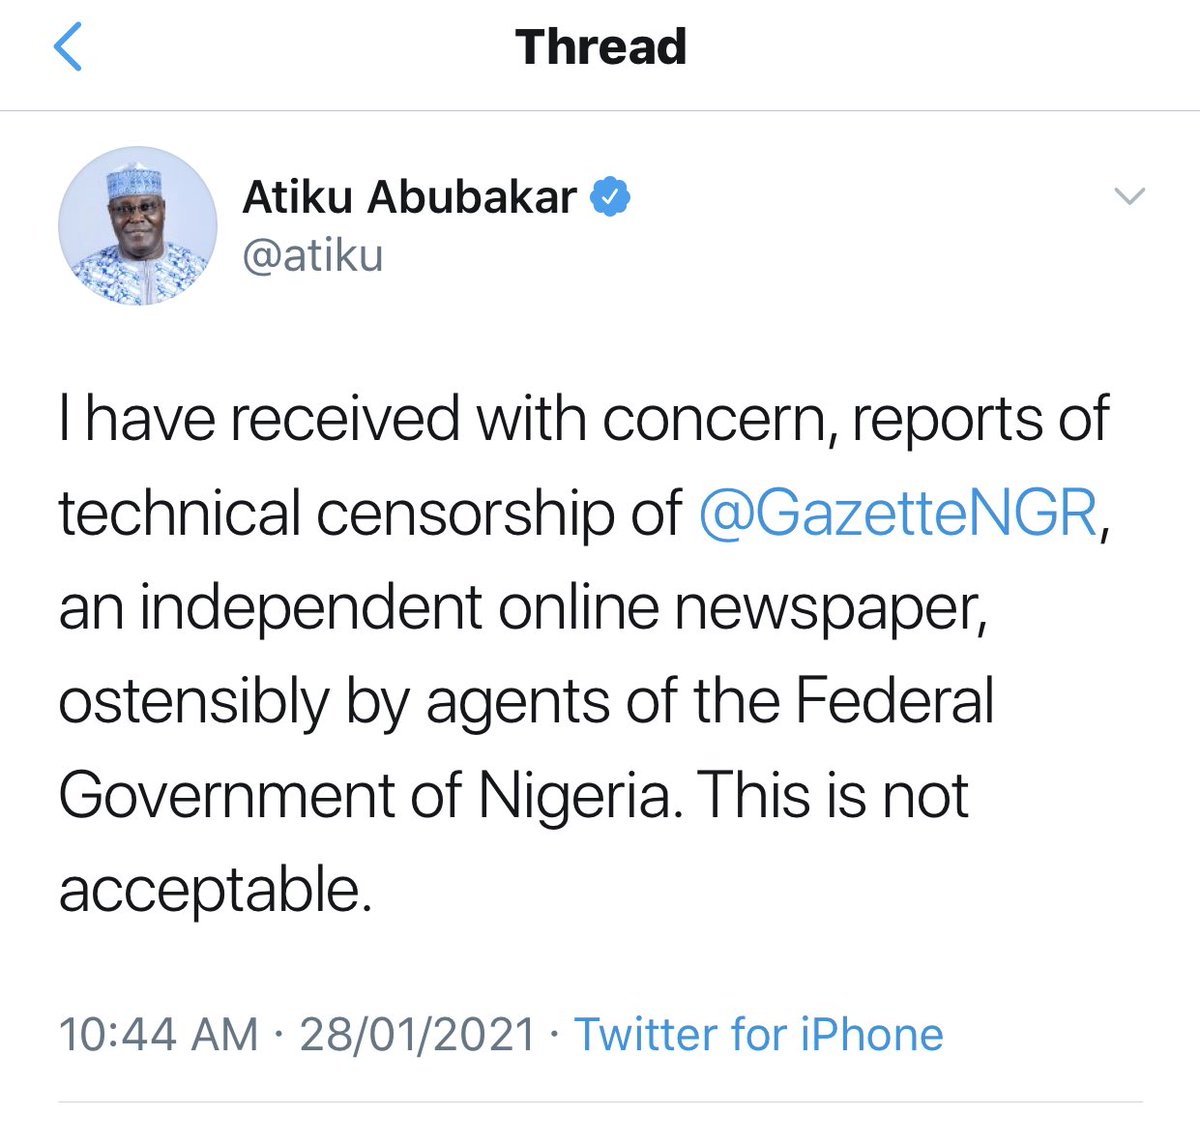 1.  @atiku You have Never been one who loves Nigeria and a Patriot.I tell you this today, your quest to be President of Nigeria,will Never happen!You know Why? You are evil and has used your wealth and resources to encourage evil against a country you seek to rule.